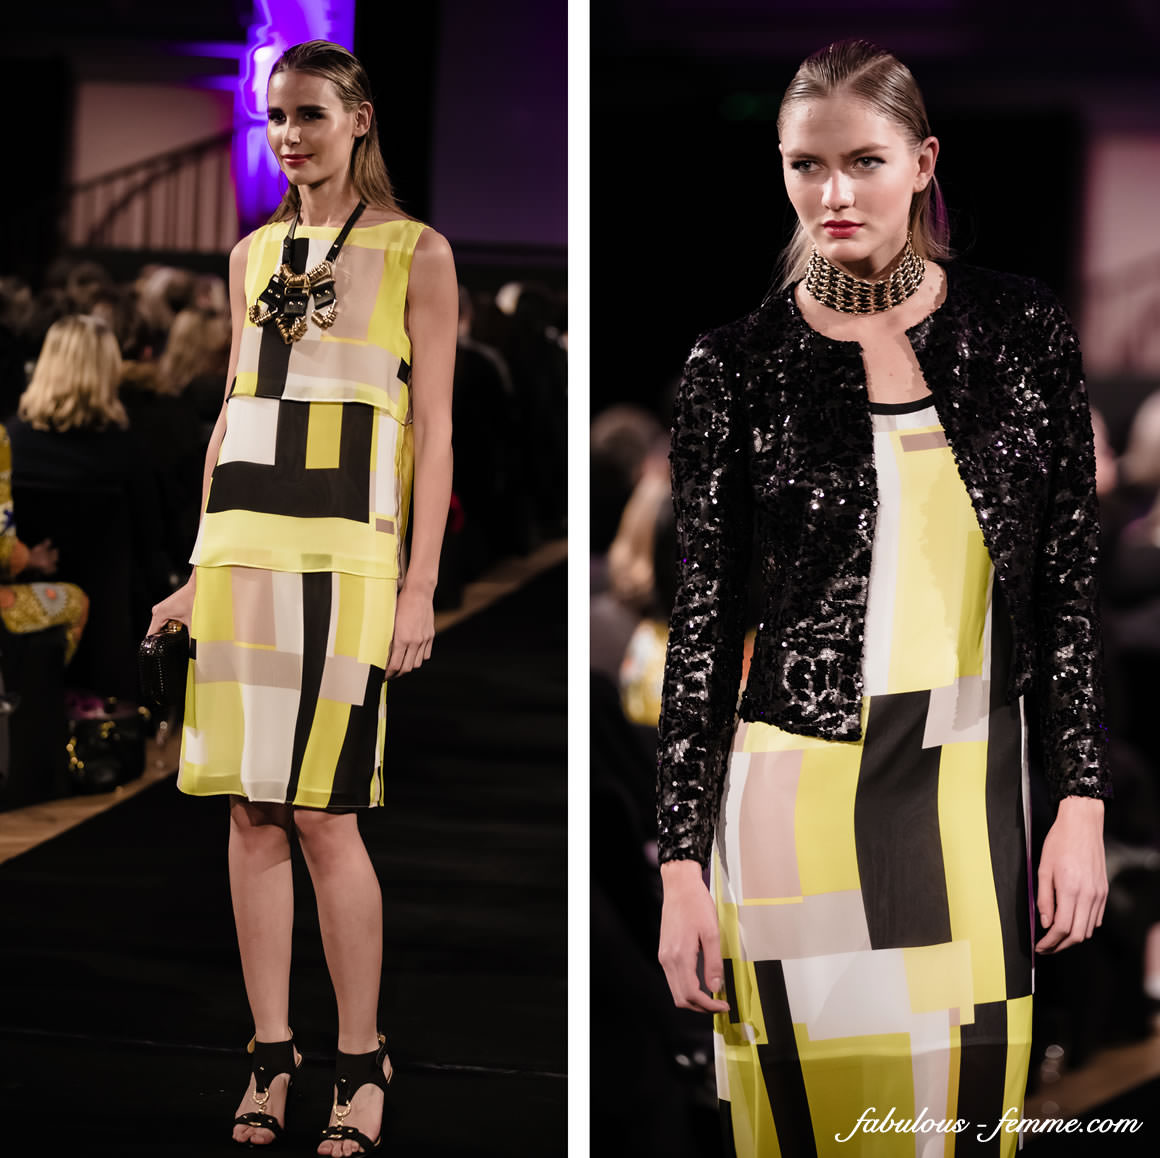 beautiful spring outfits at Melbourne Fashion Runway Show